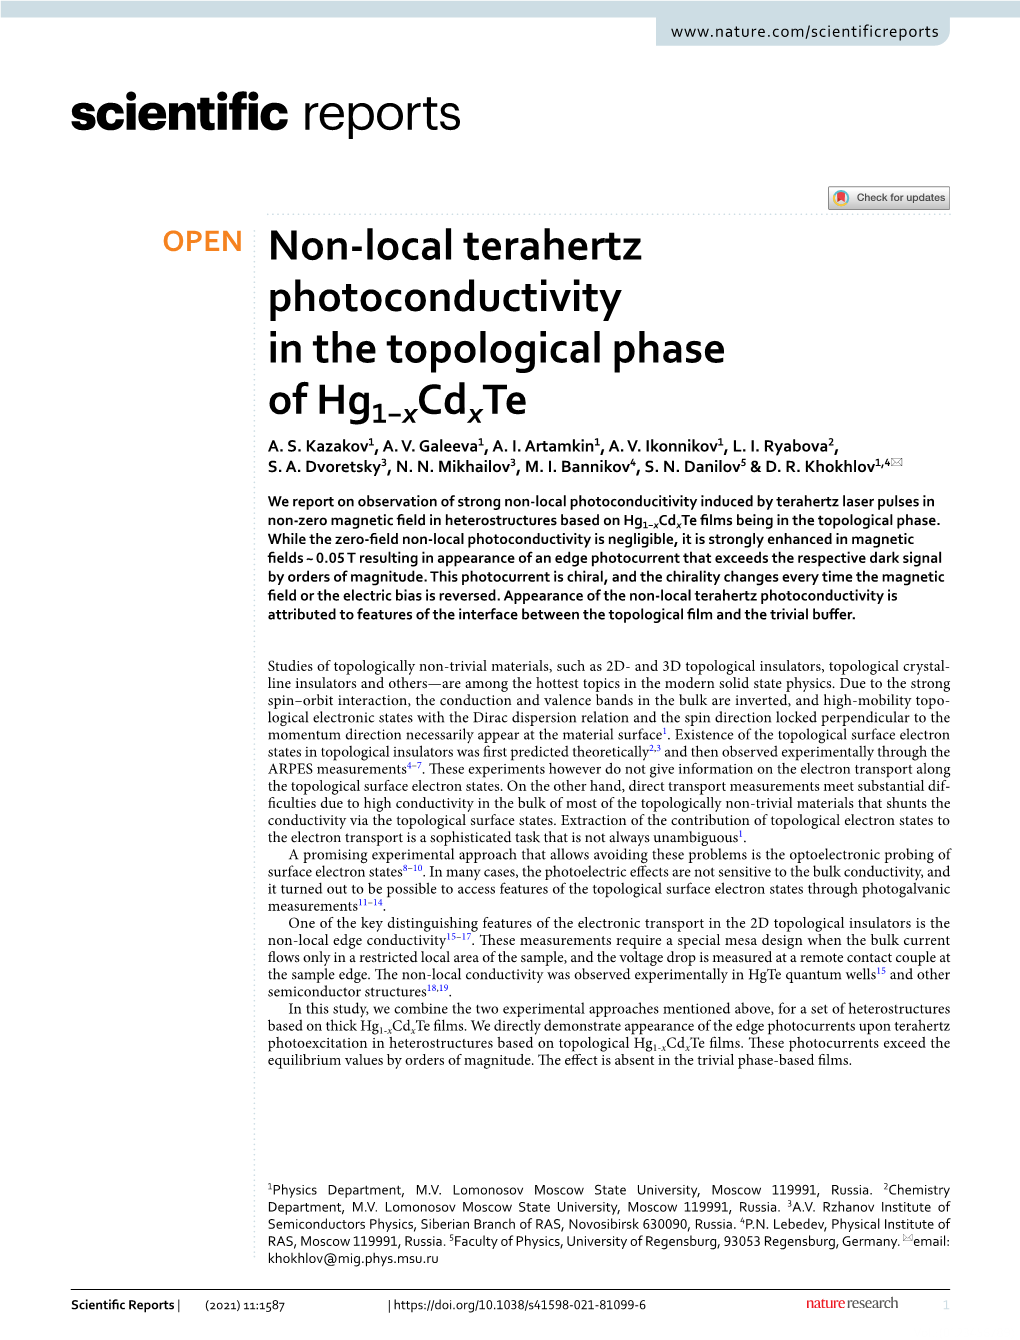 Non-Local Terahertz Photoconductivity in the Topological Phase of Hg1